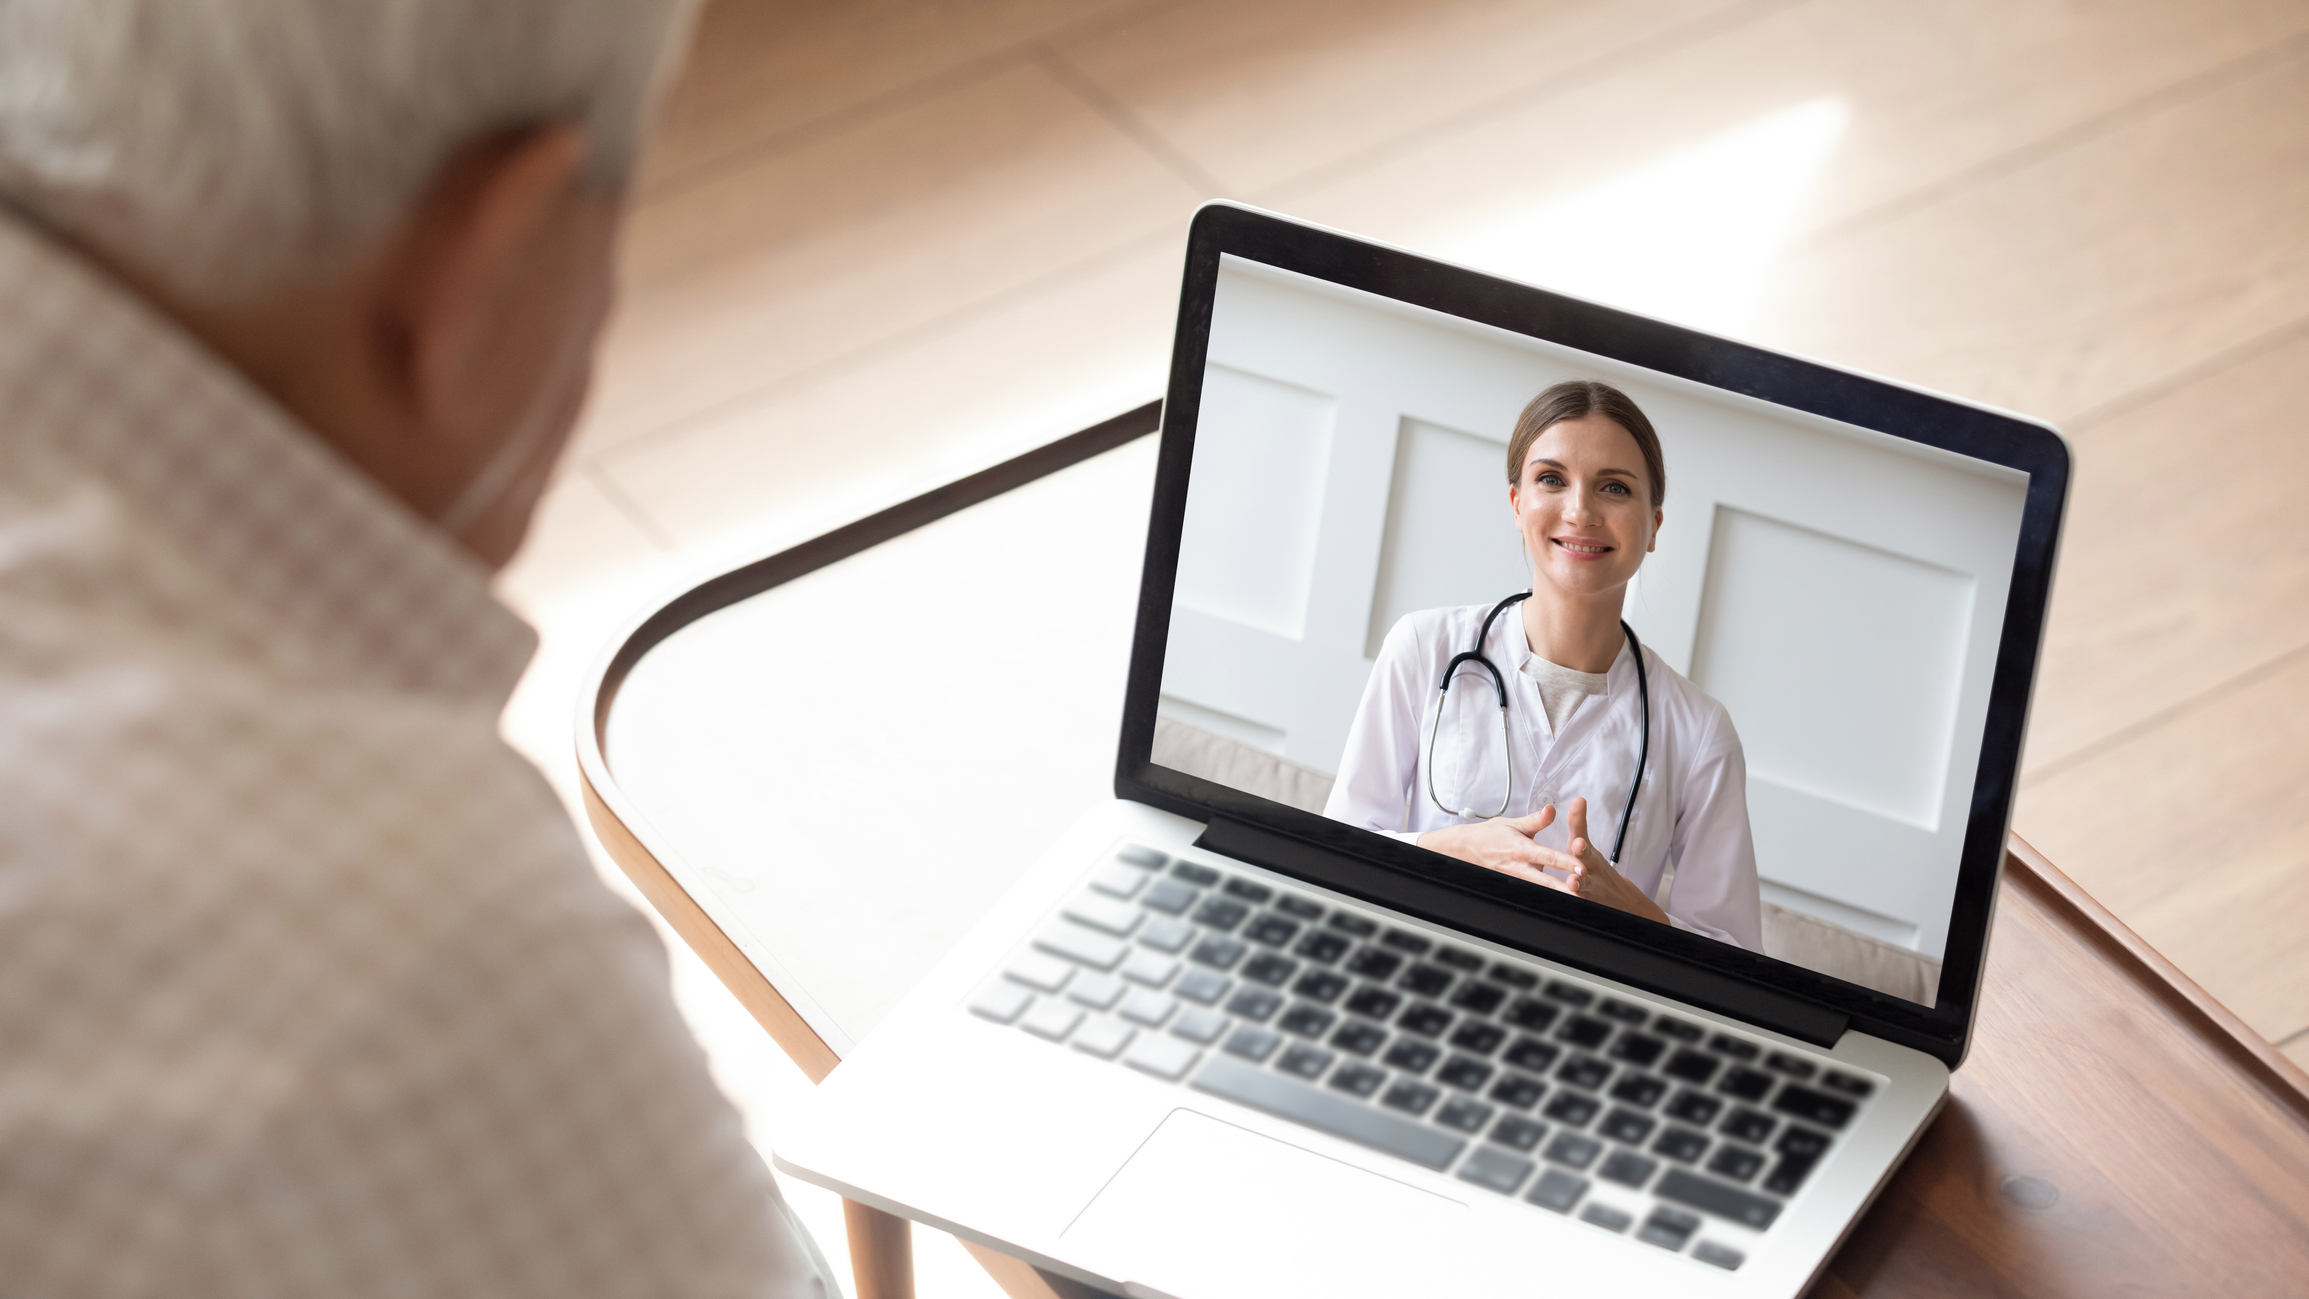 Elderly man receiving care from a doctor virtually through live video call